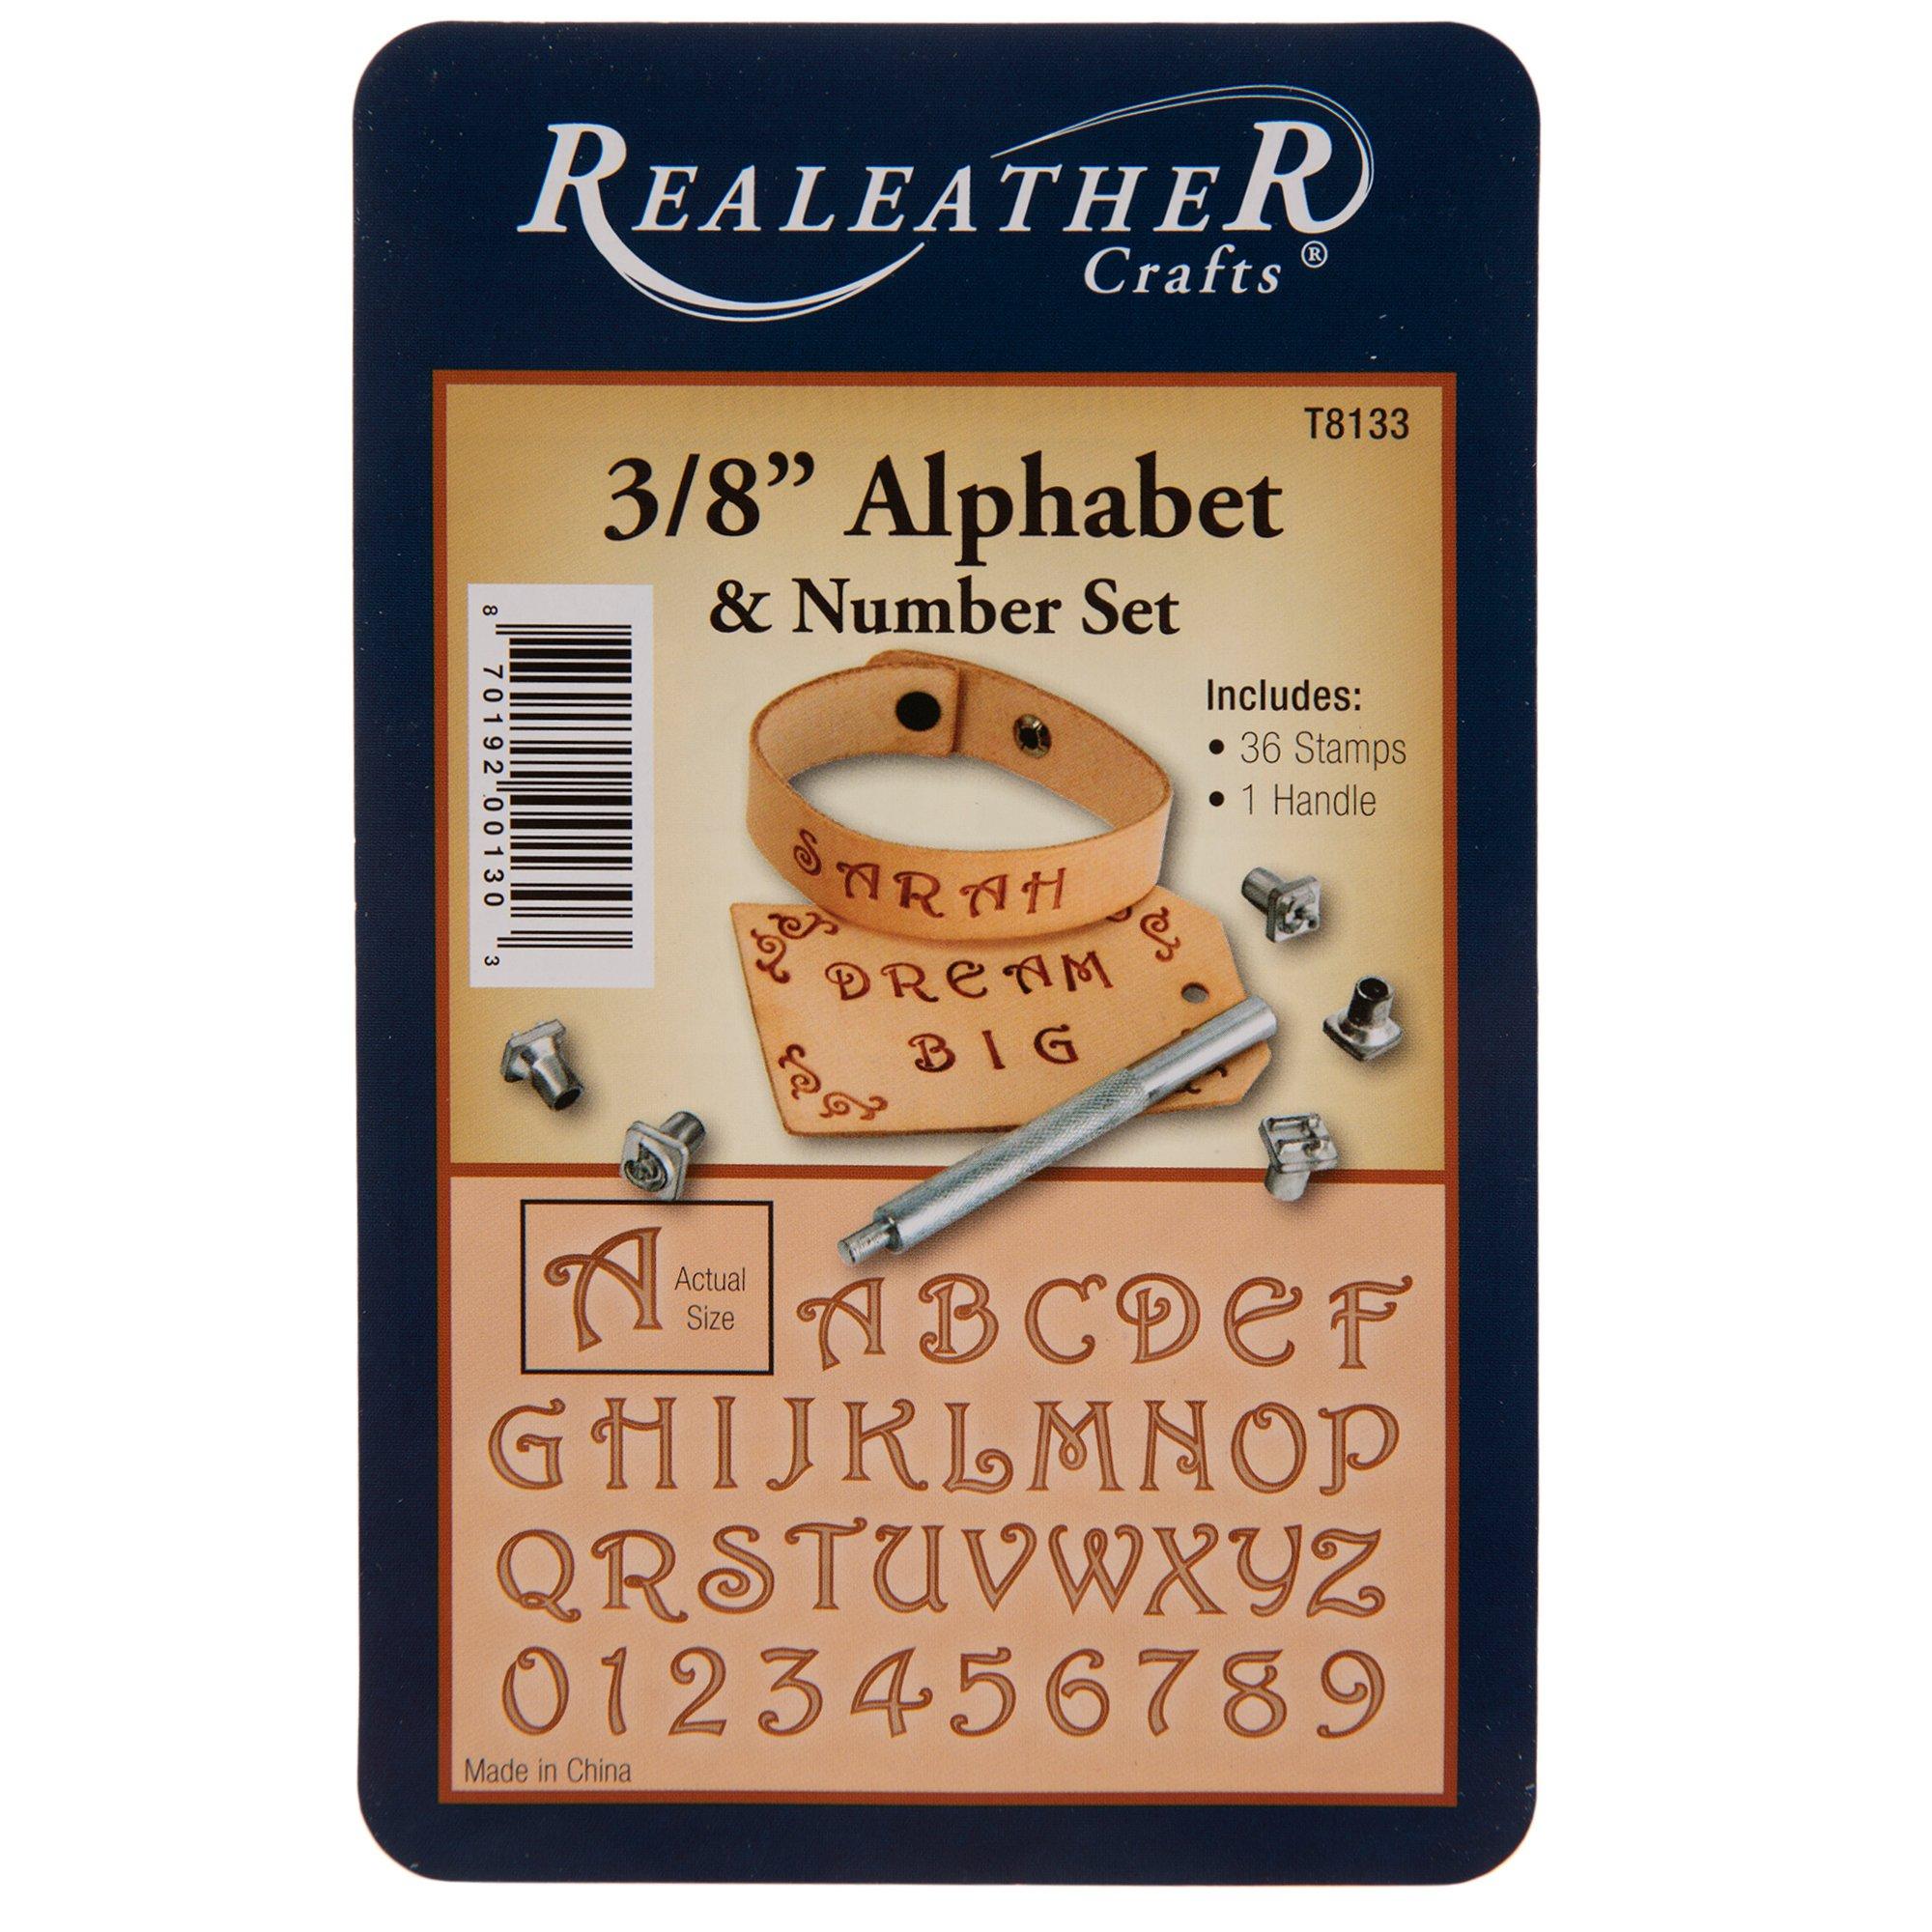 Leather Craft Supplies & Tools